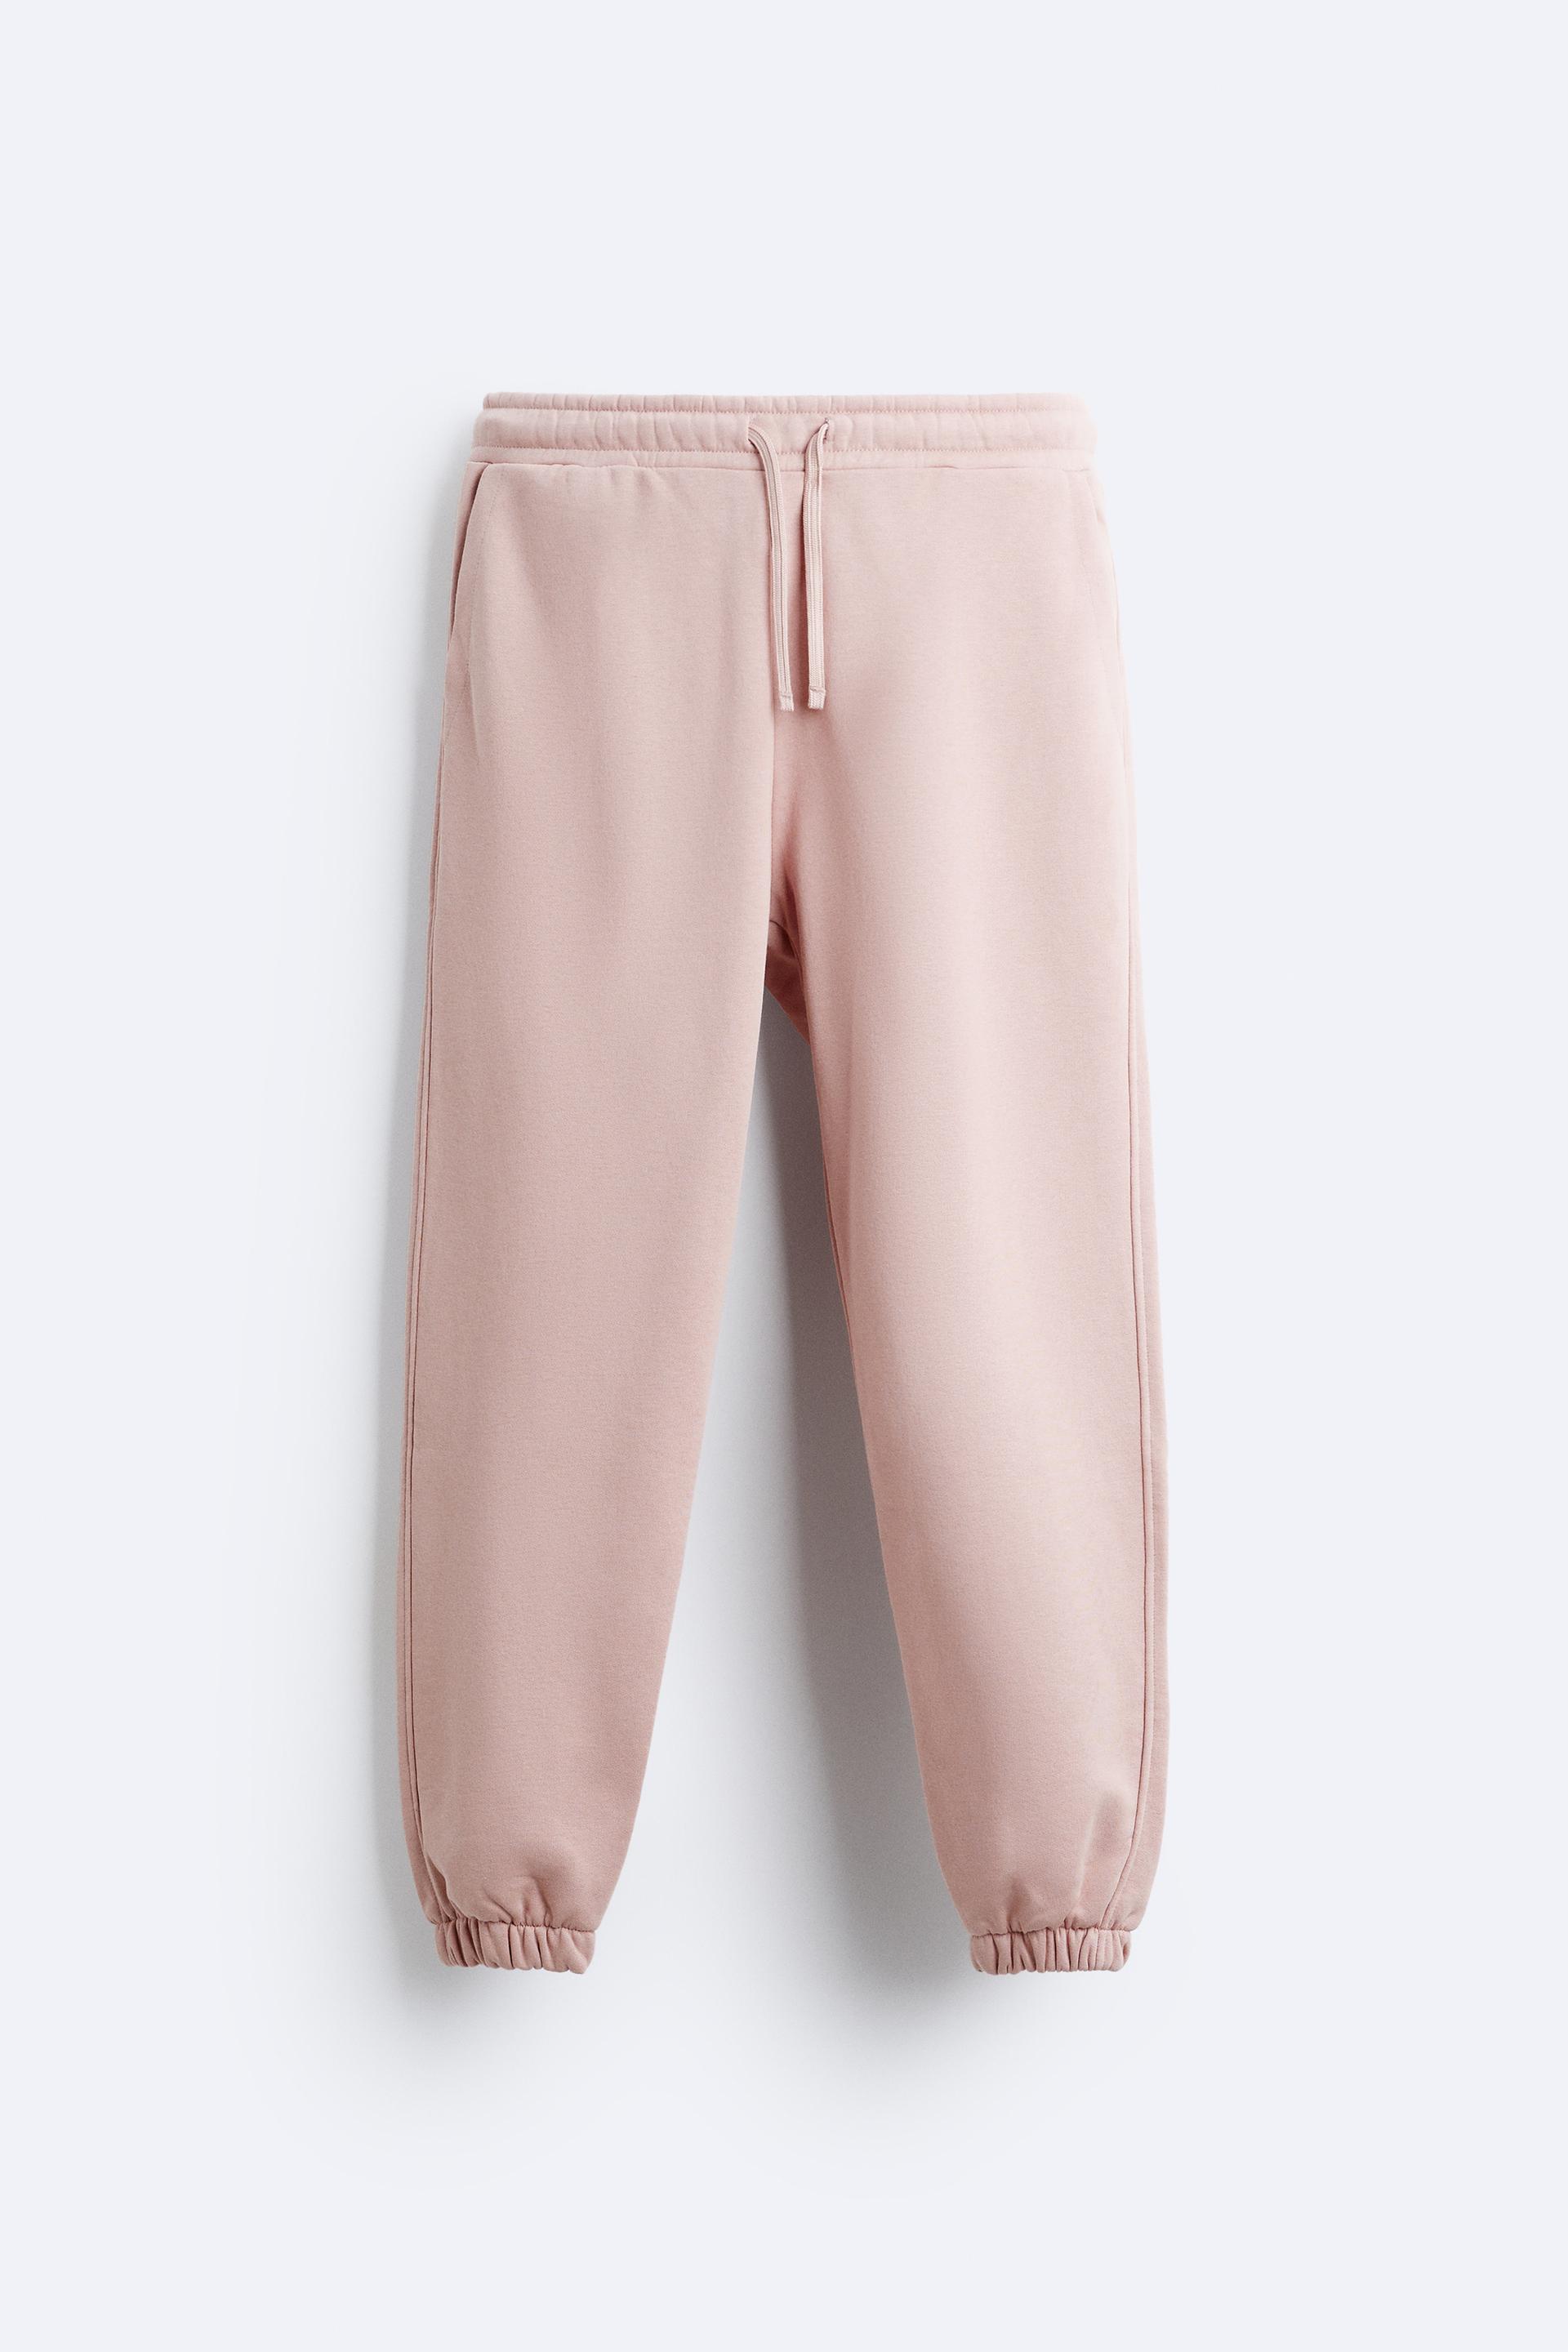 Buy Zara Joggers & Tracksuit Bottoms for Women Online - prices in dubai